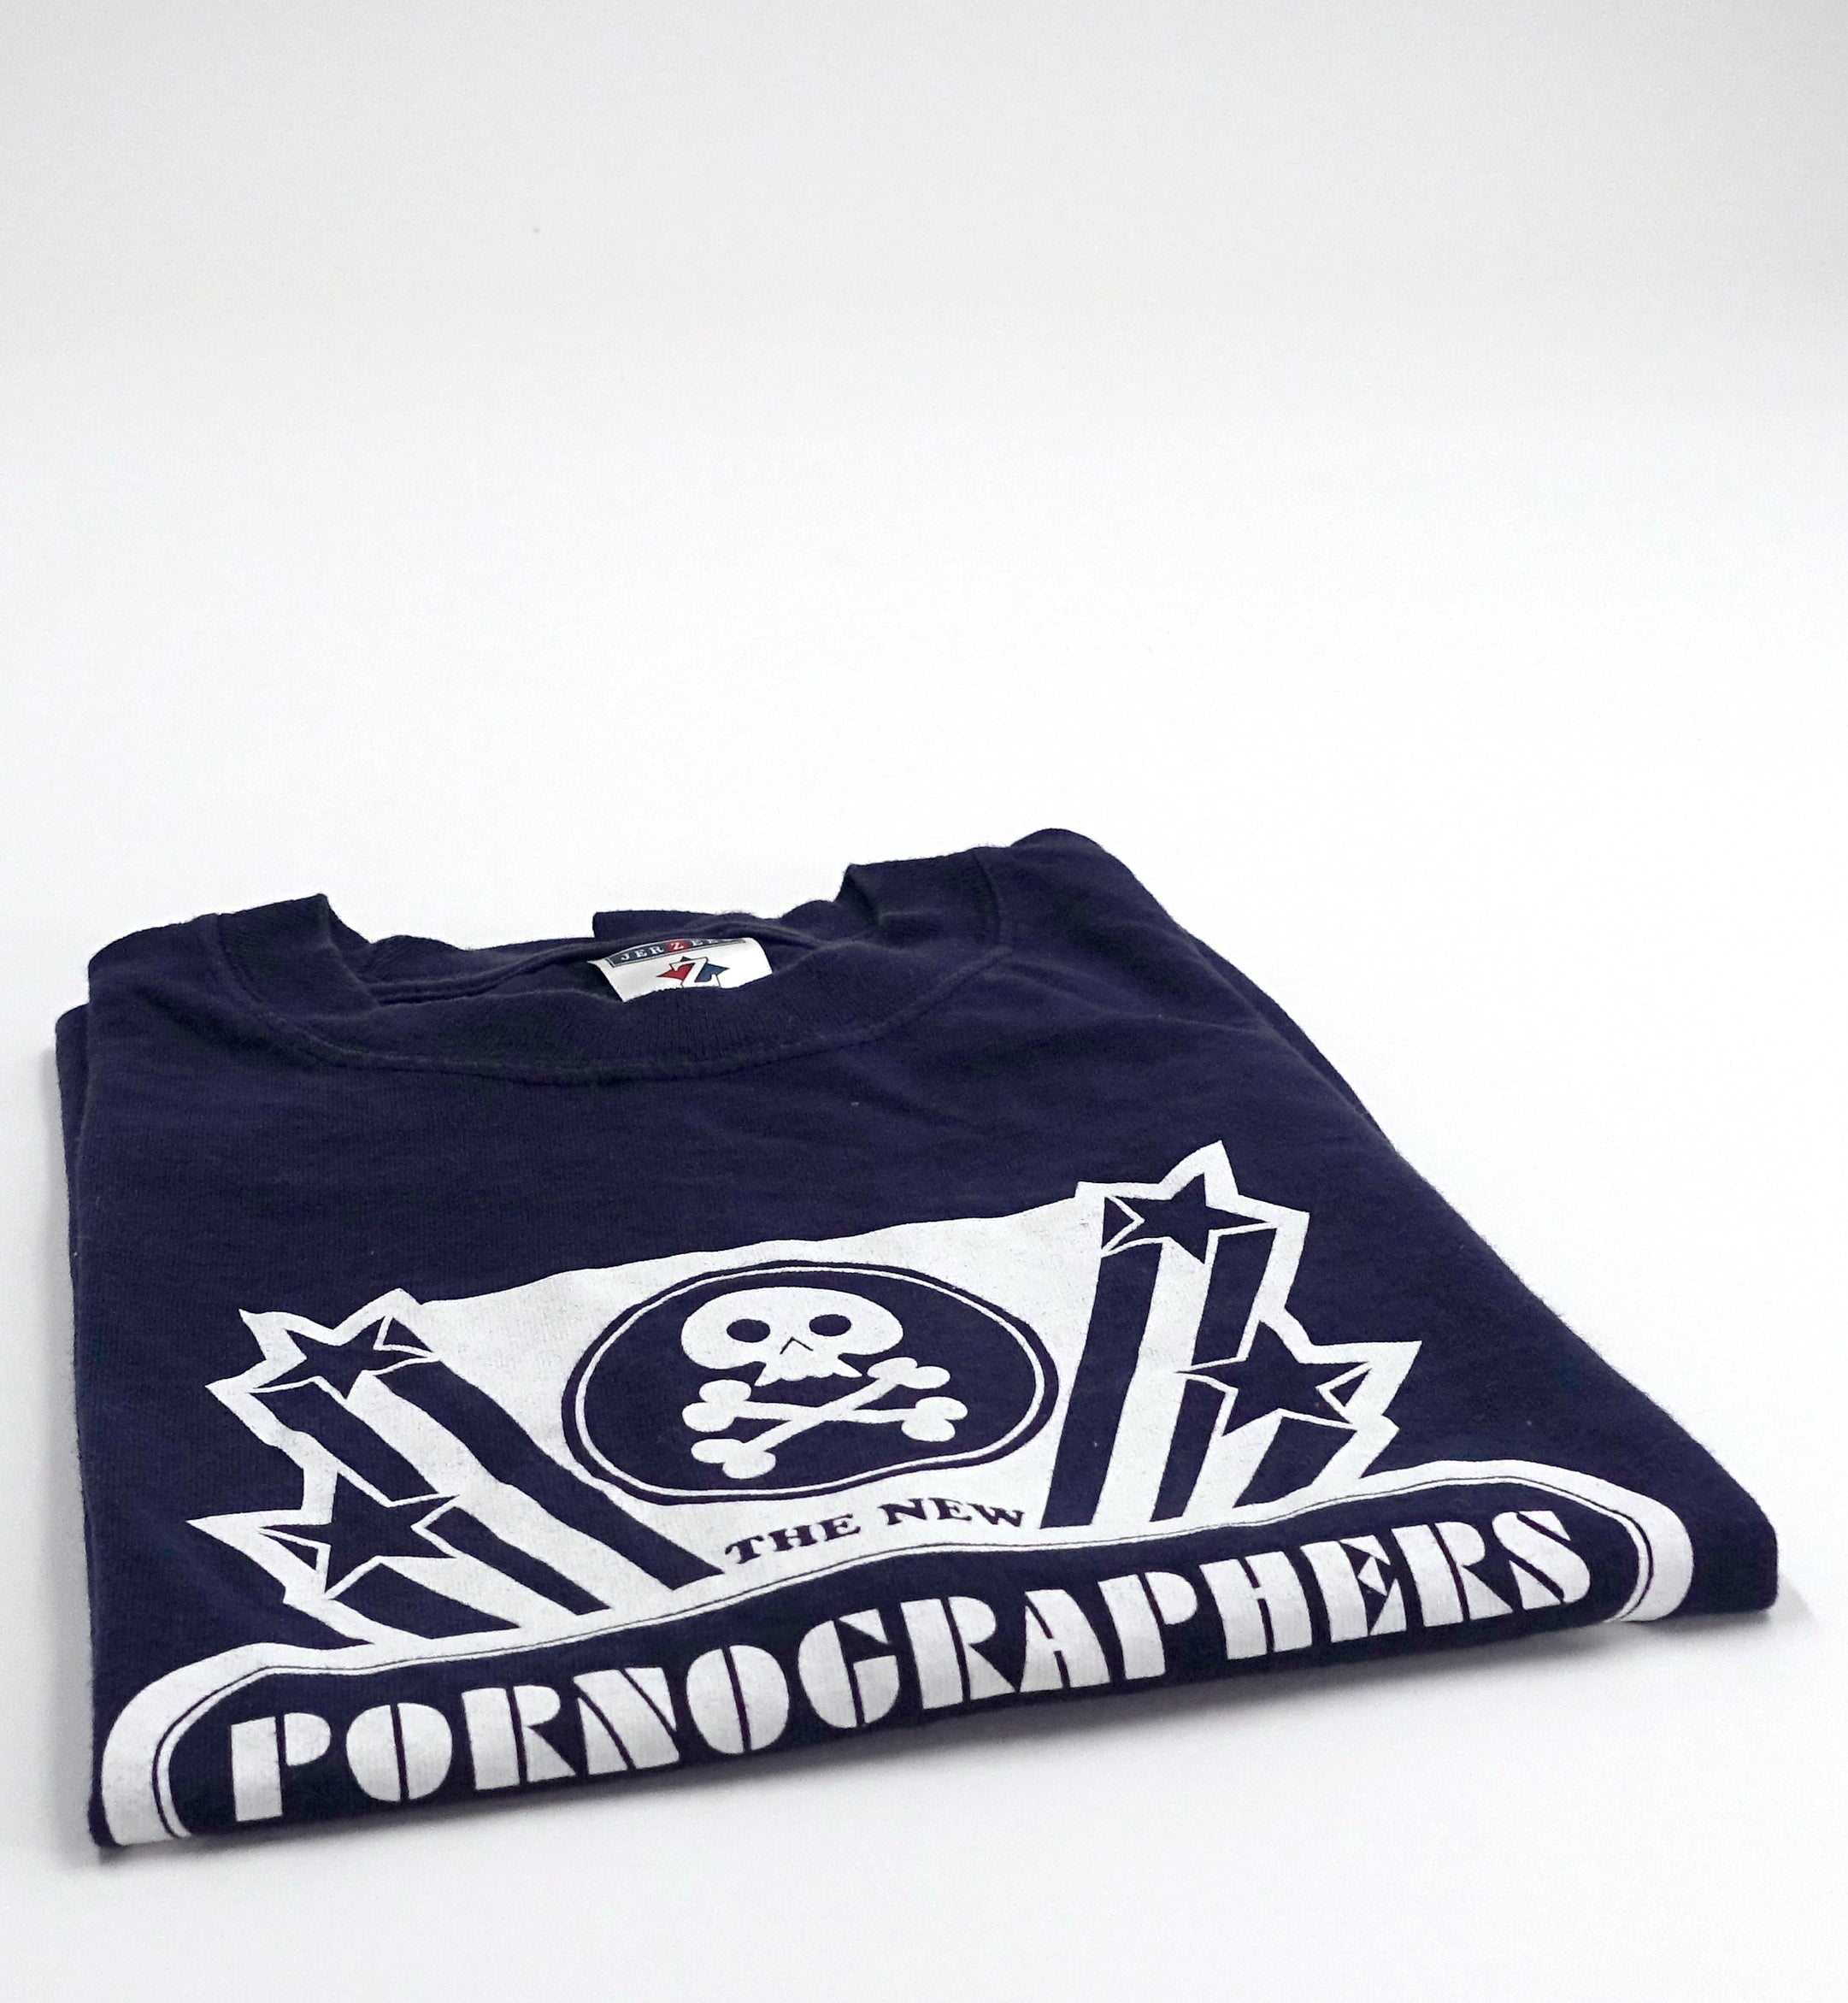 the New Pornographers ‎– Crossbones and Stars 90's Tour Shirt Size Large